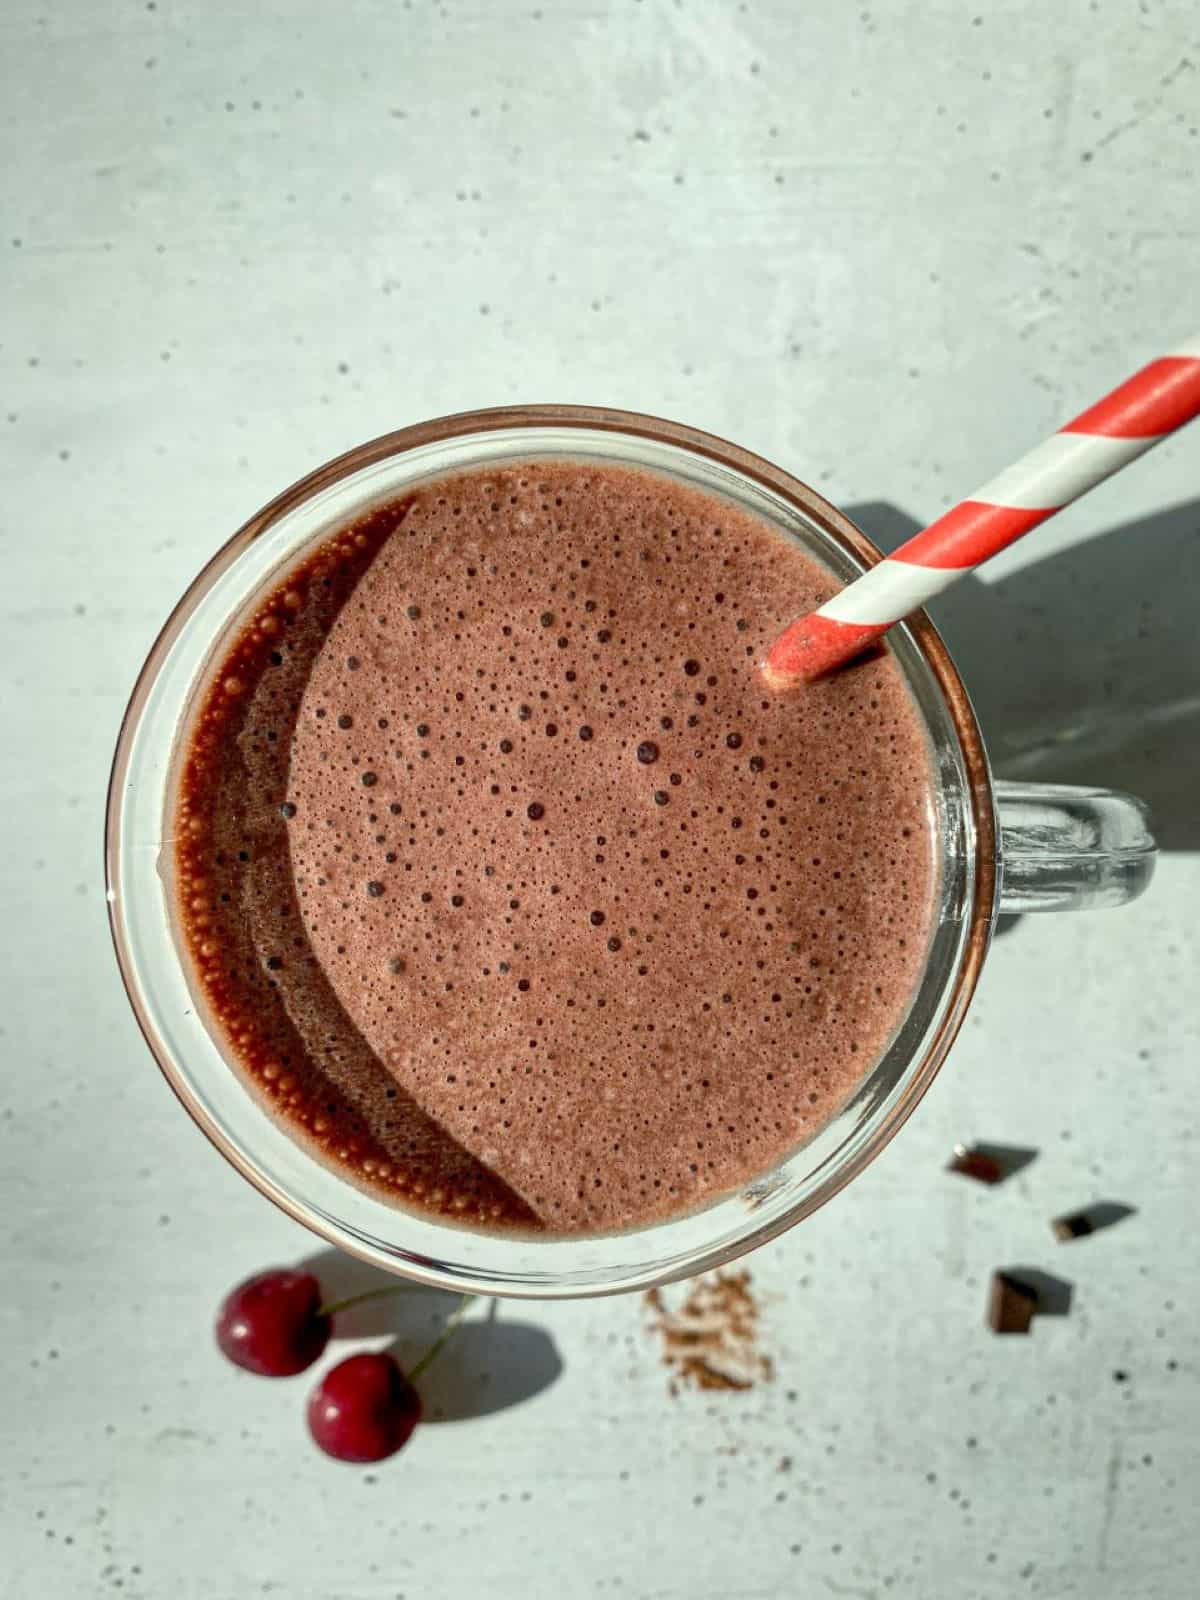 An overhead image of a creamy chocolate cherry smoothie with a red and white straw.